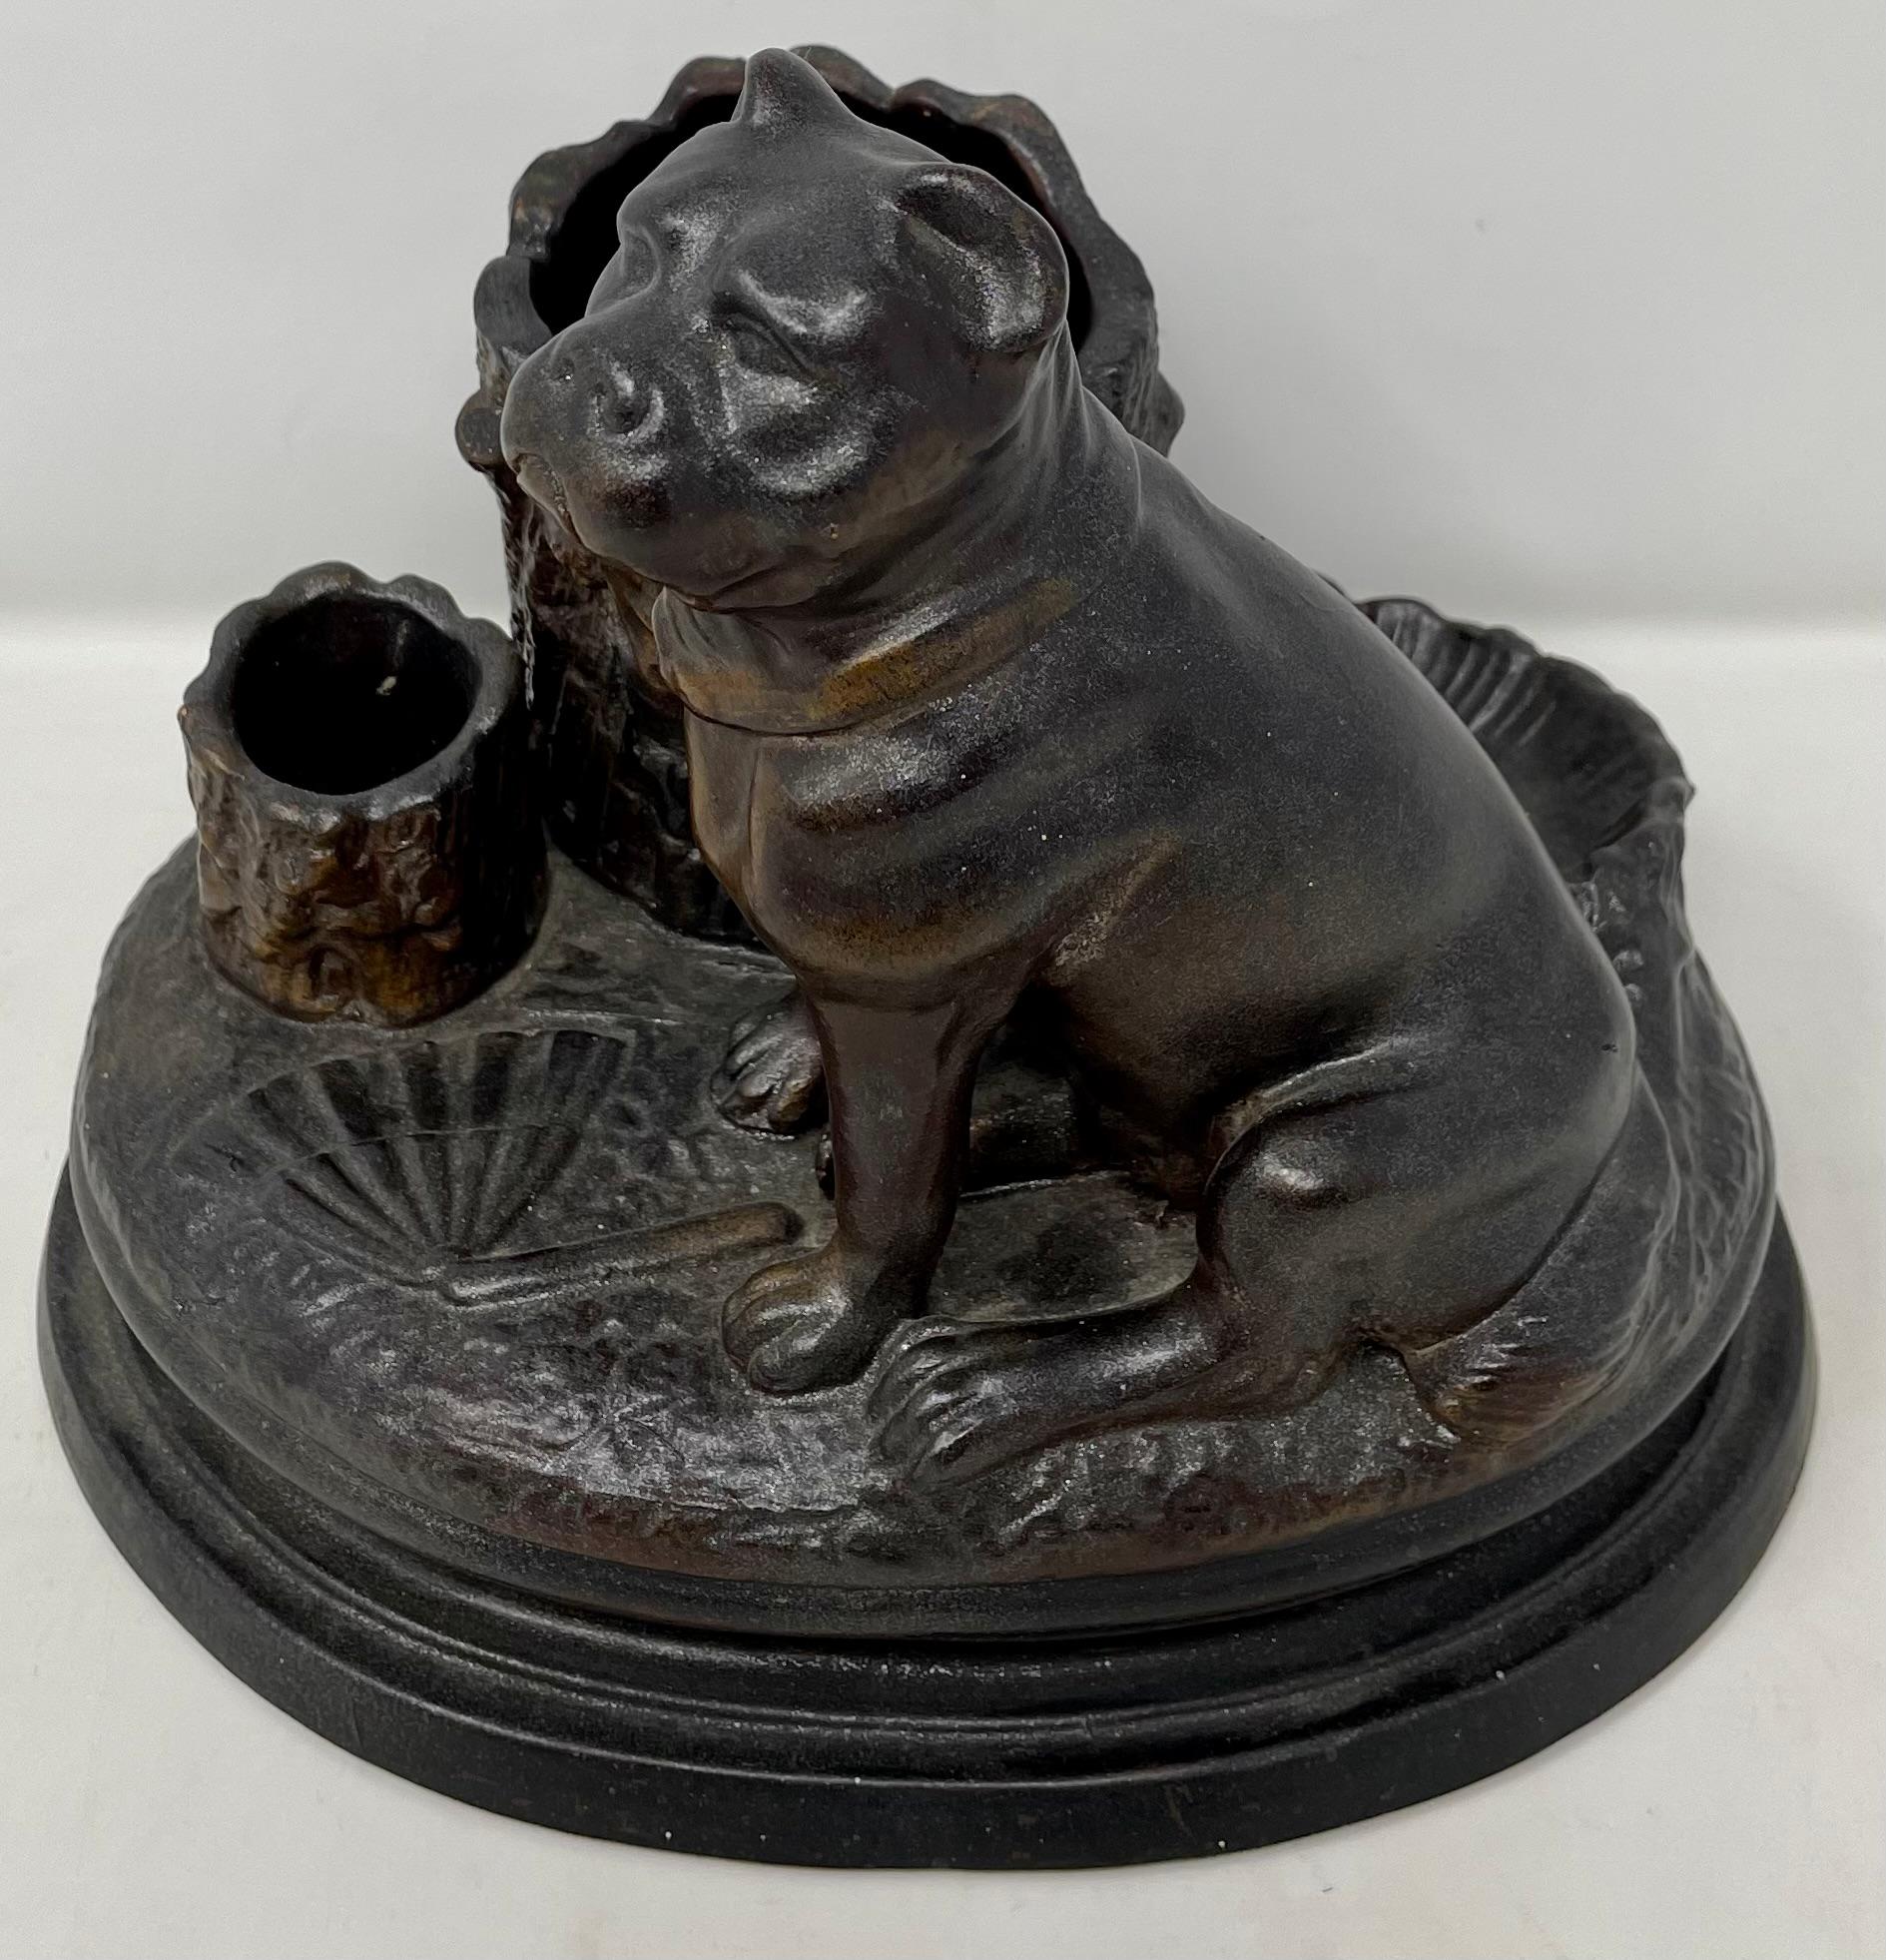 Antique late 19th century salt-glazed pottery figural dog cigar holder with matchstick holder and ashtray.